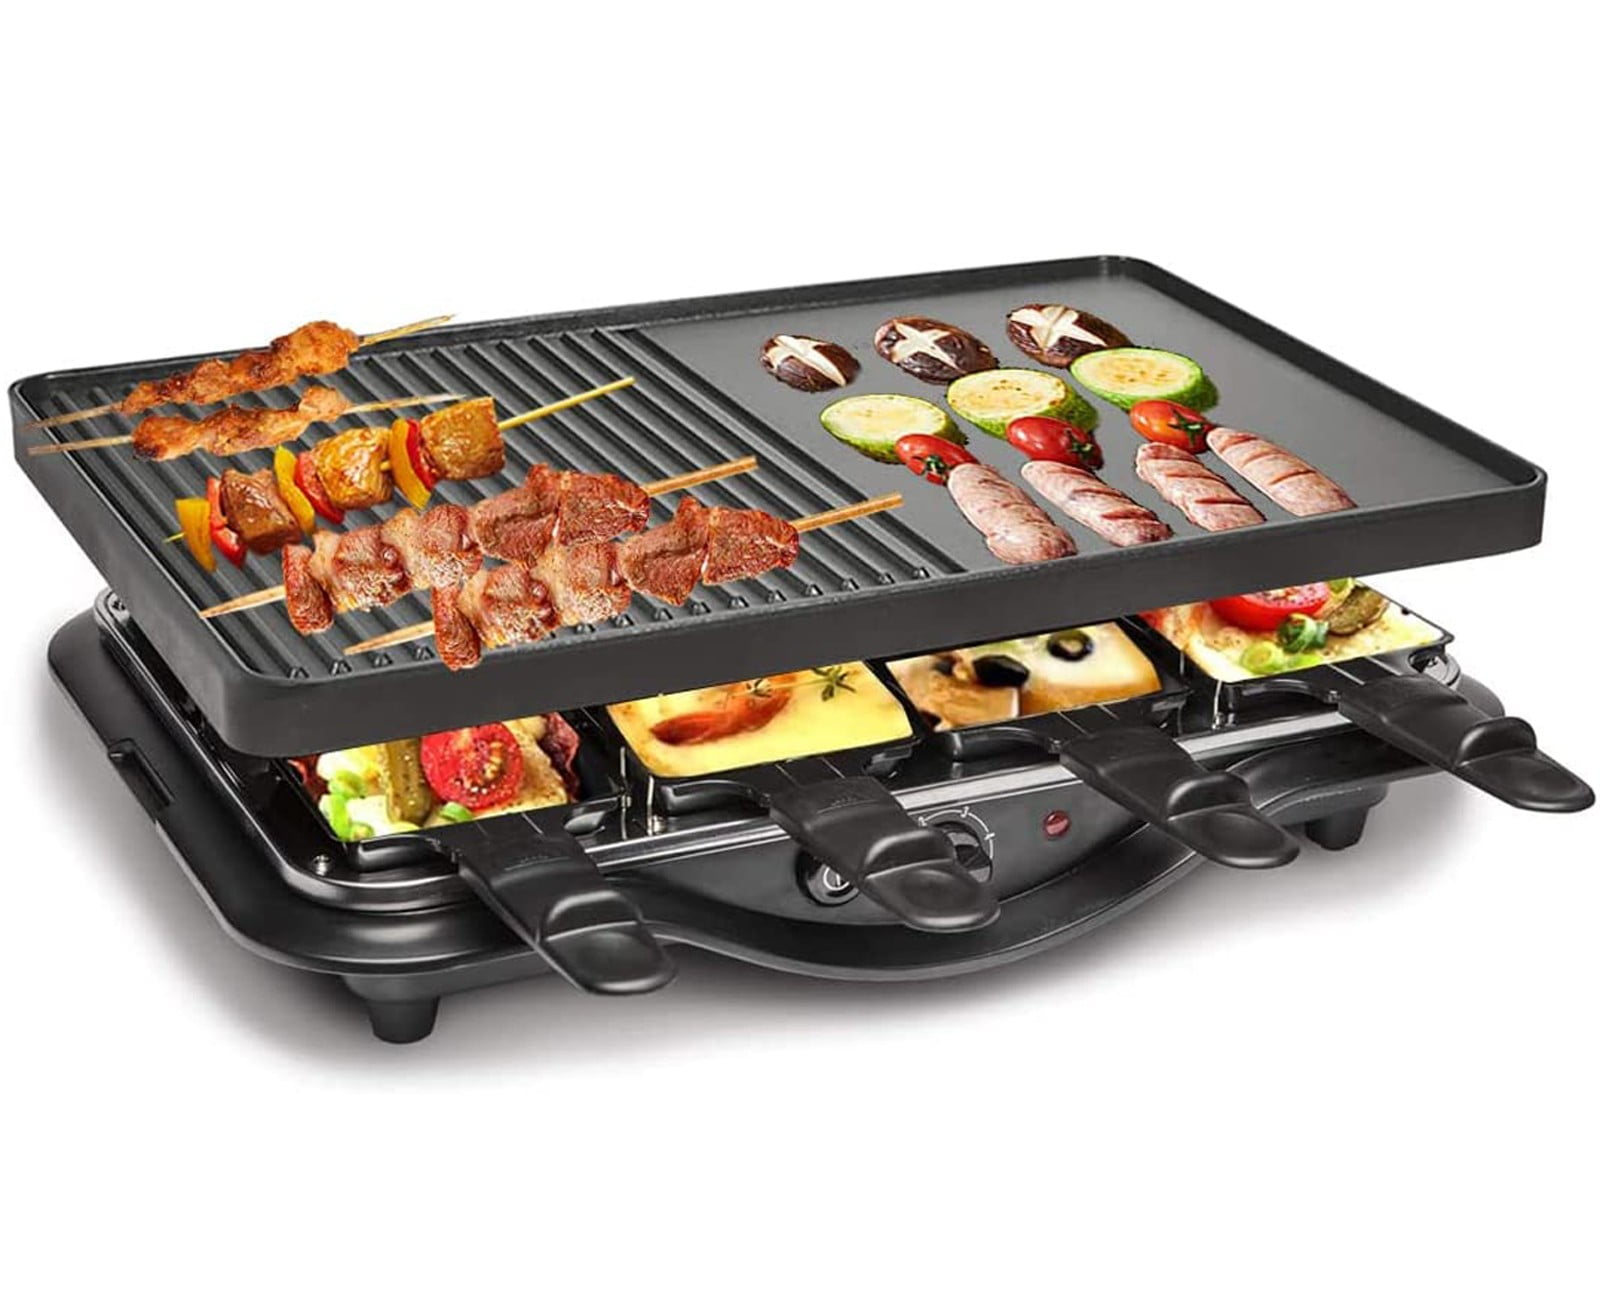 GreenLife RNAB0B9T5WDNP greenlife raclette indoor tabletop grill, healthy  ceramic nonstick, 2-in-1 grill and griddle, 8 square nonstick pans, adjusta